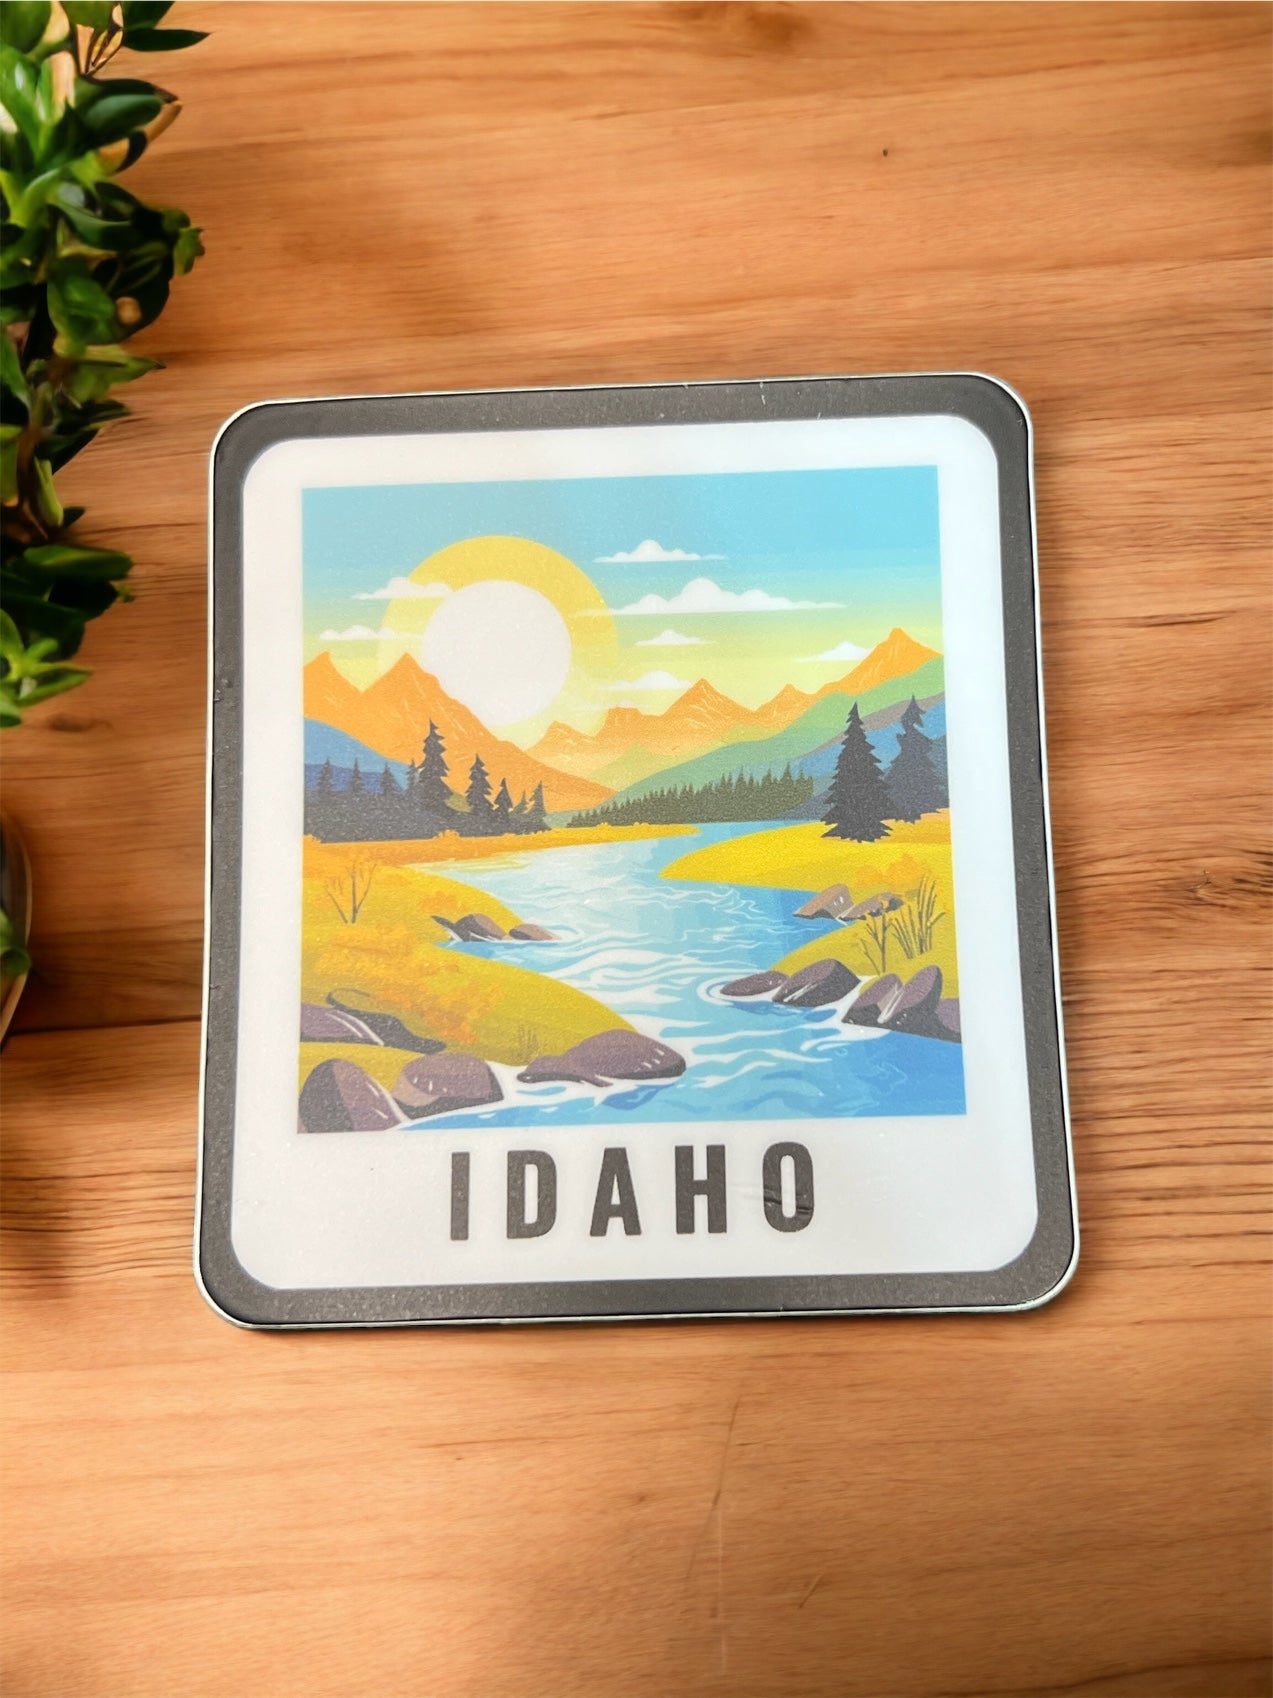 Idaho Stickers are a must for Idahoans. This Idaho sticker has a beautiful river running through it. It showcases the beauty that surrounds us living in Idaho. Idaho is so beautiful and this Idaho Sticker showcases the adventure and beauty we have.